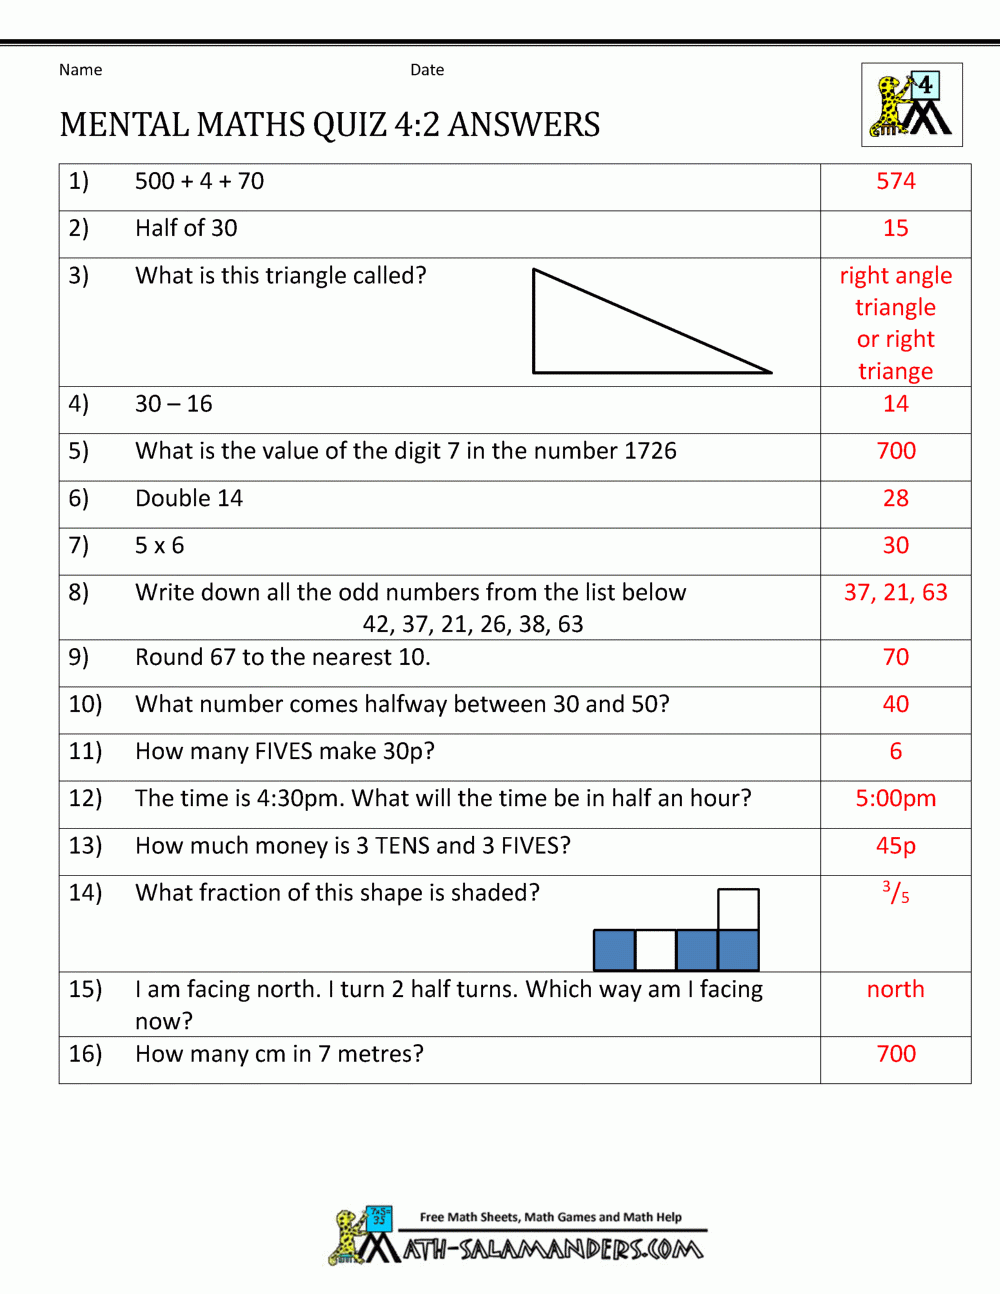 common-core-math-1-identifying-functions-worksheet-common-core-worksheets